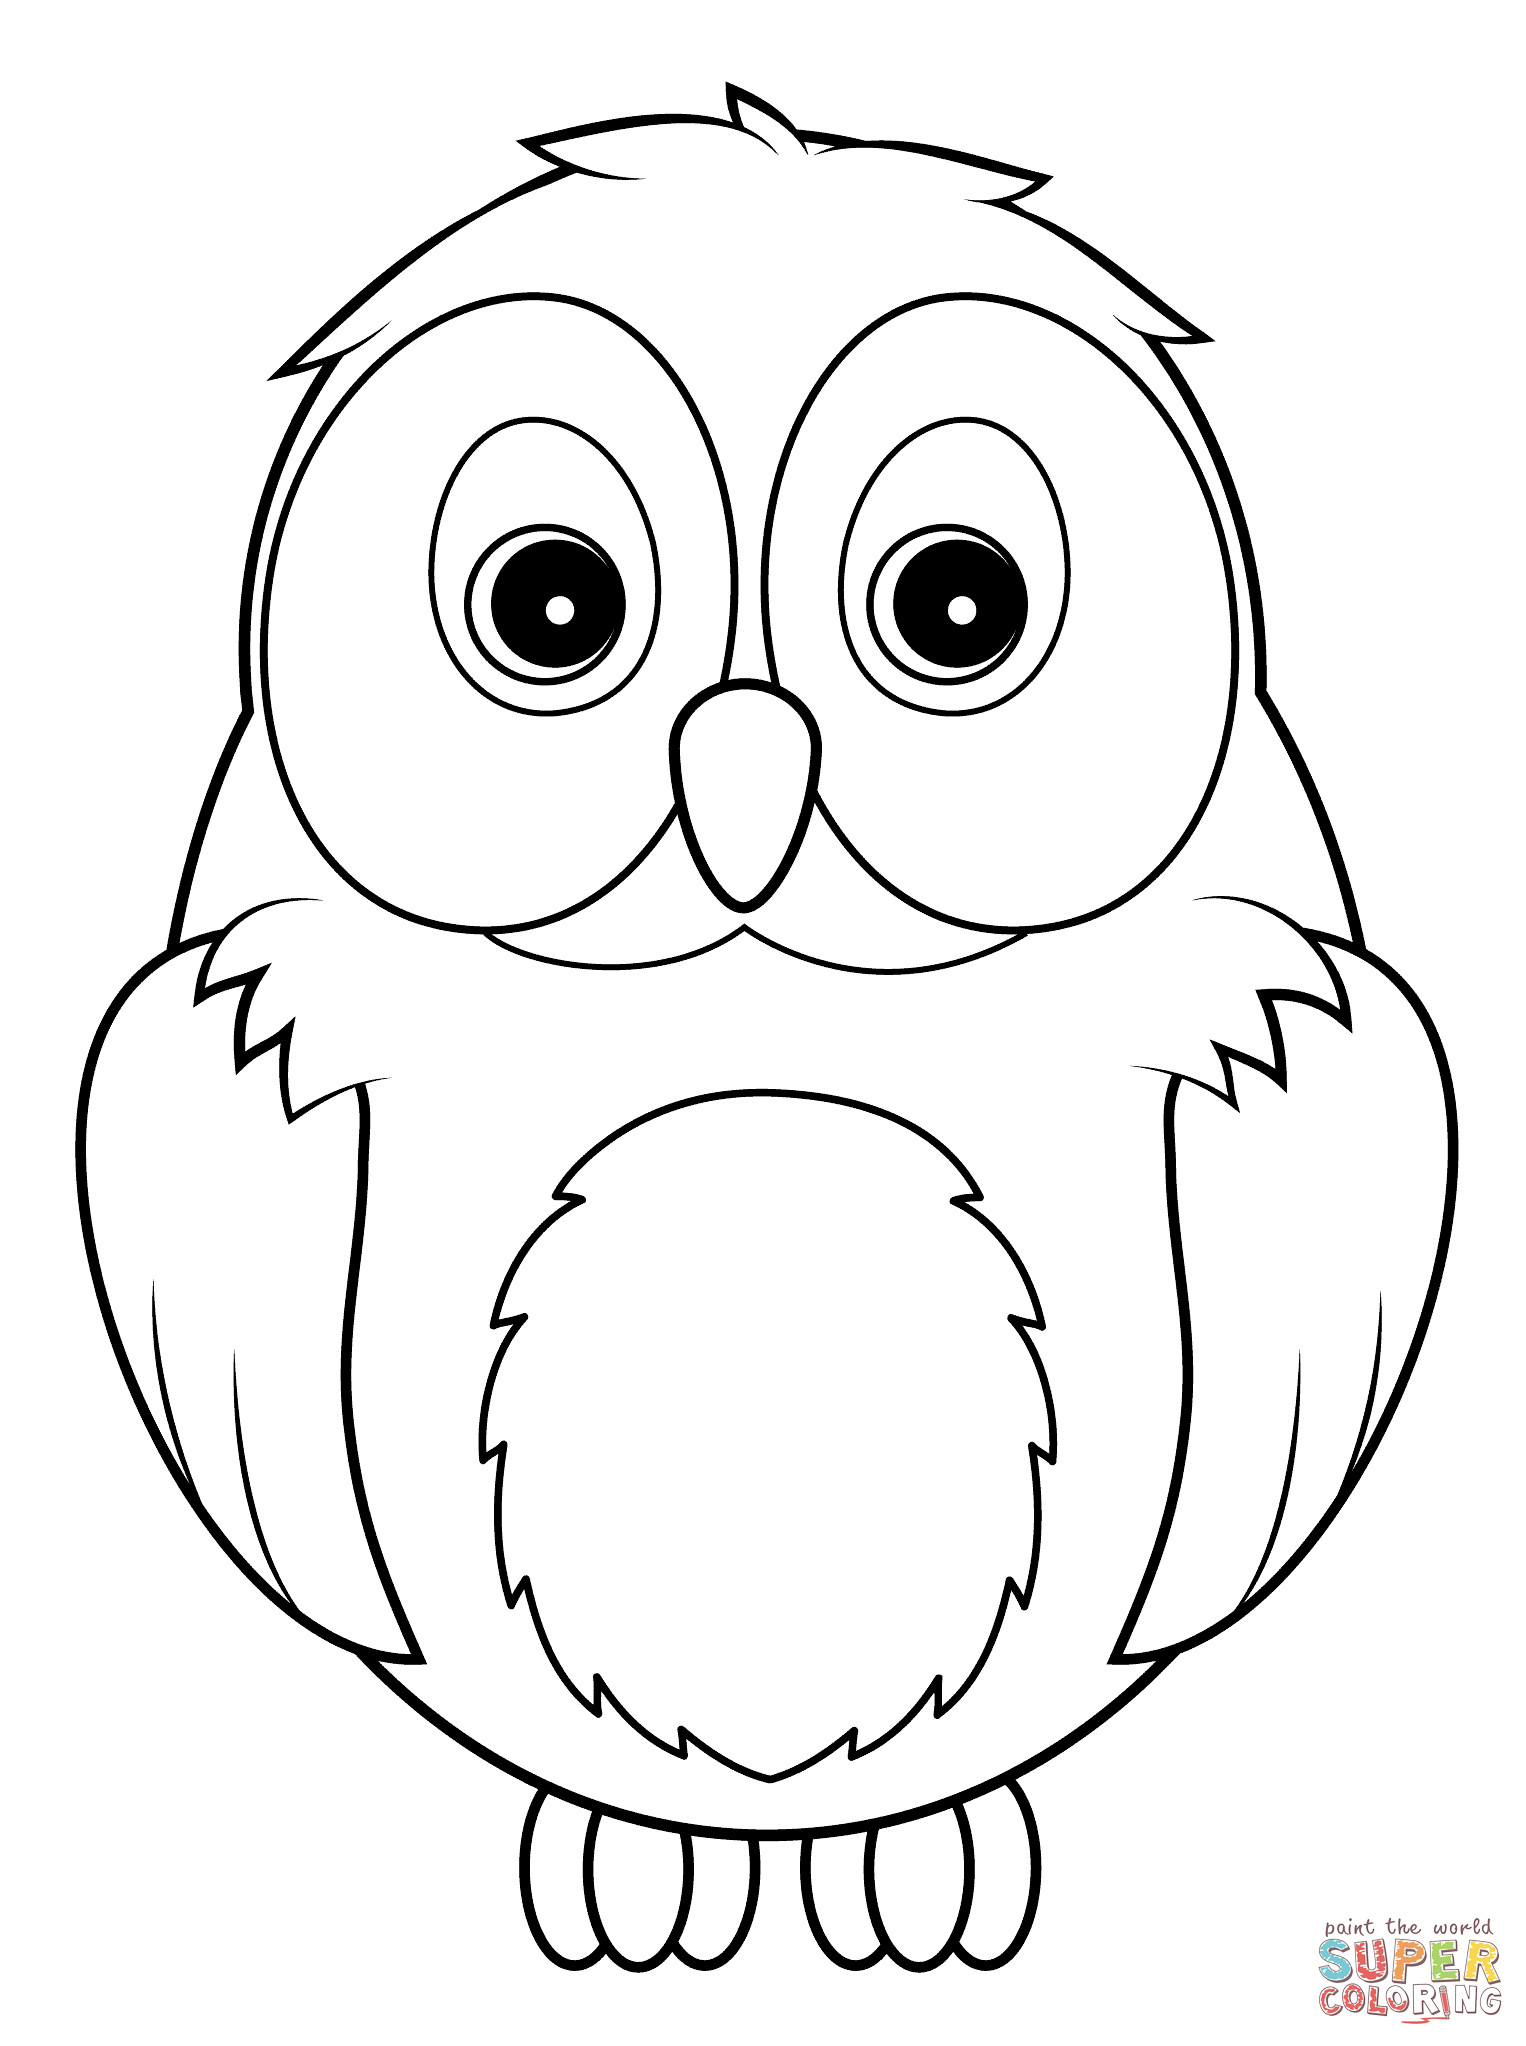 Owl Coloring Pages For Kids
 how to draw a cute snowy owl for kids Google Search